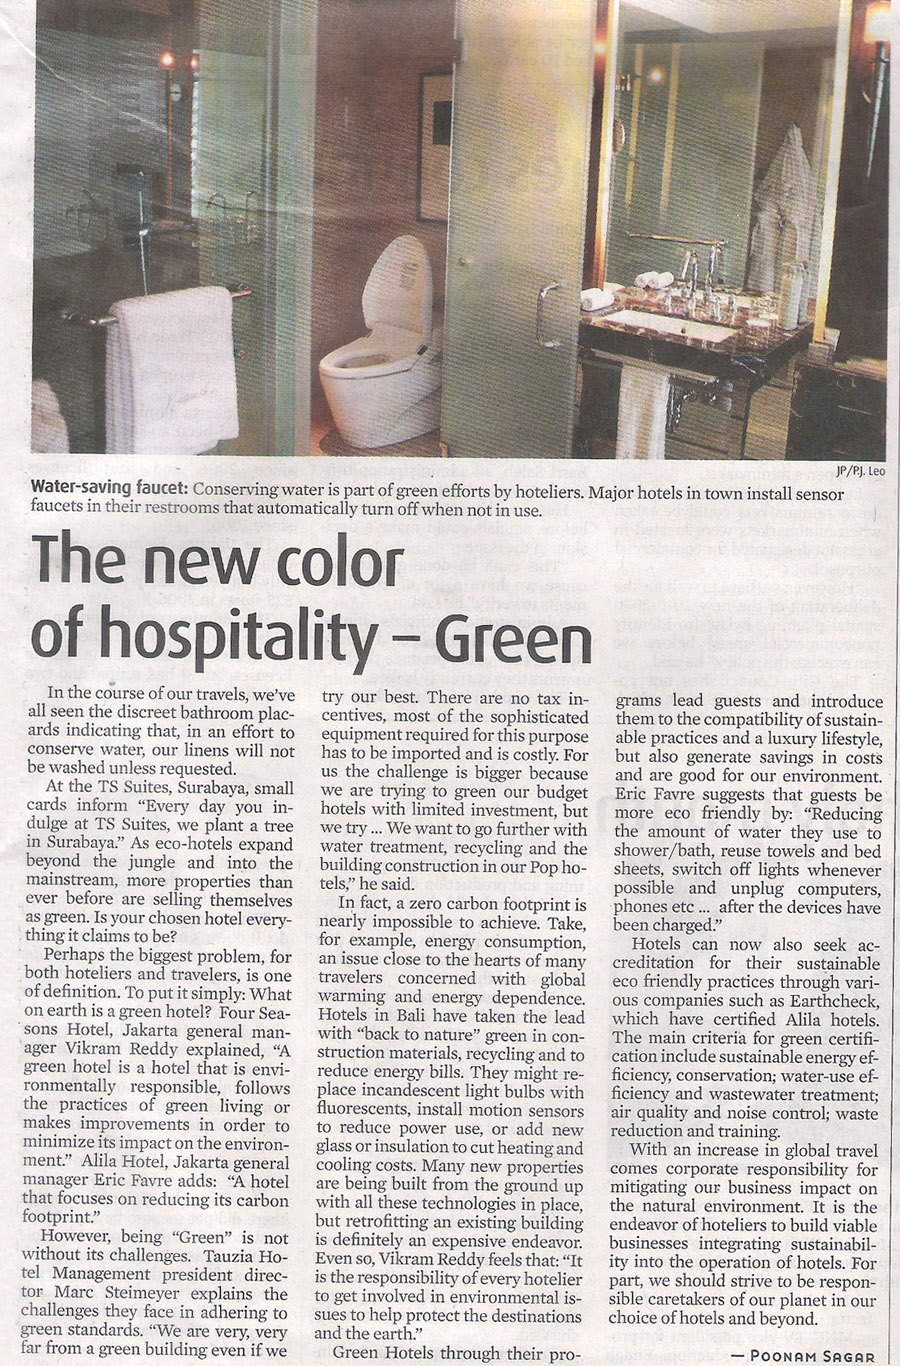 The New Color of Hospitality - Green